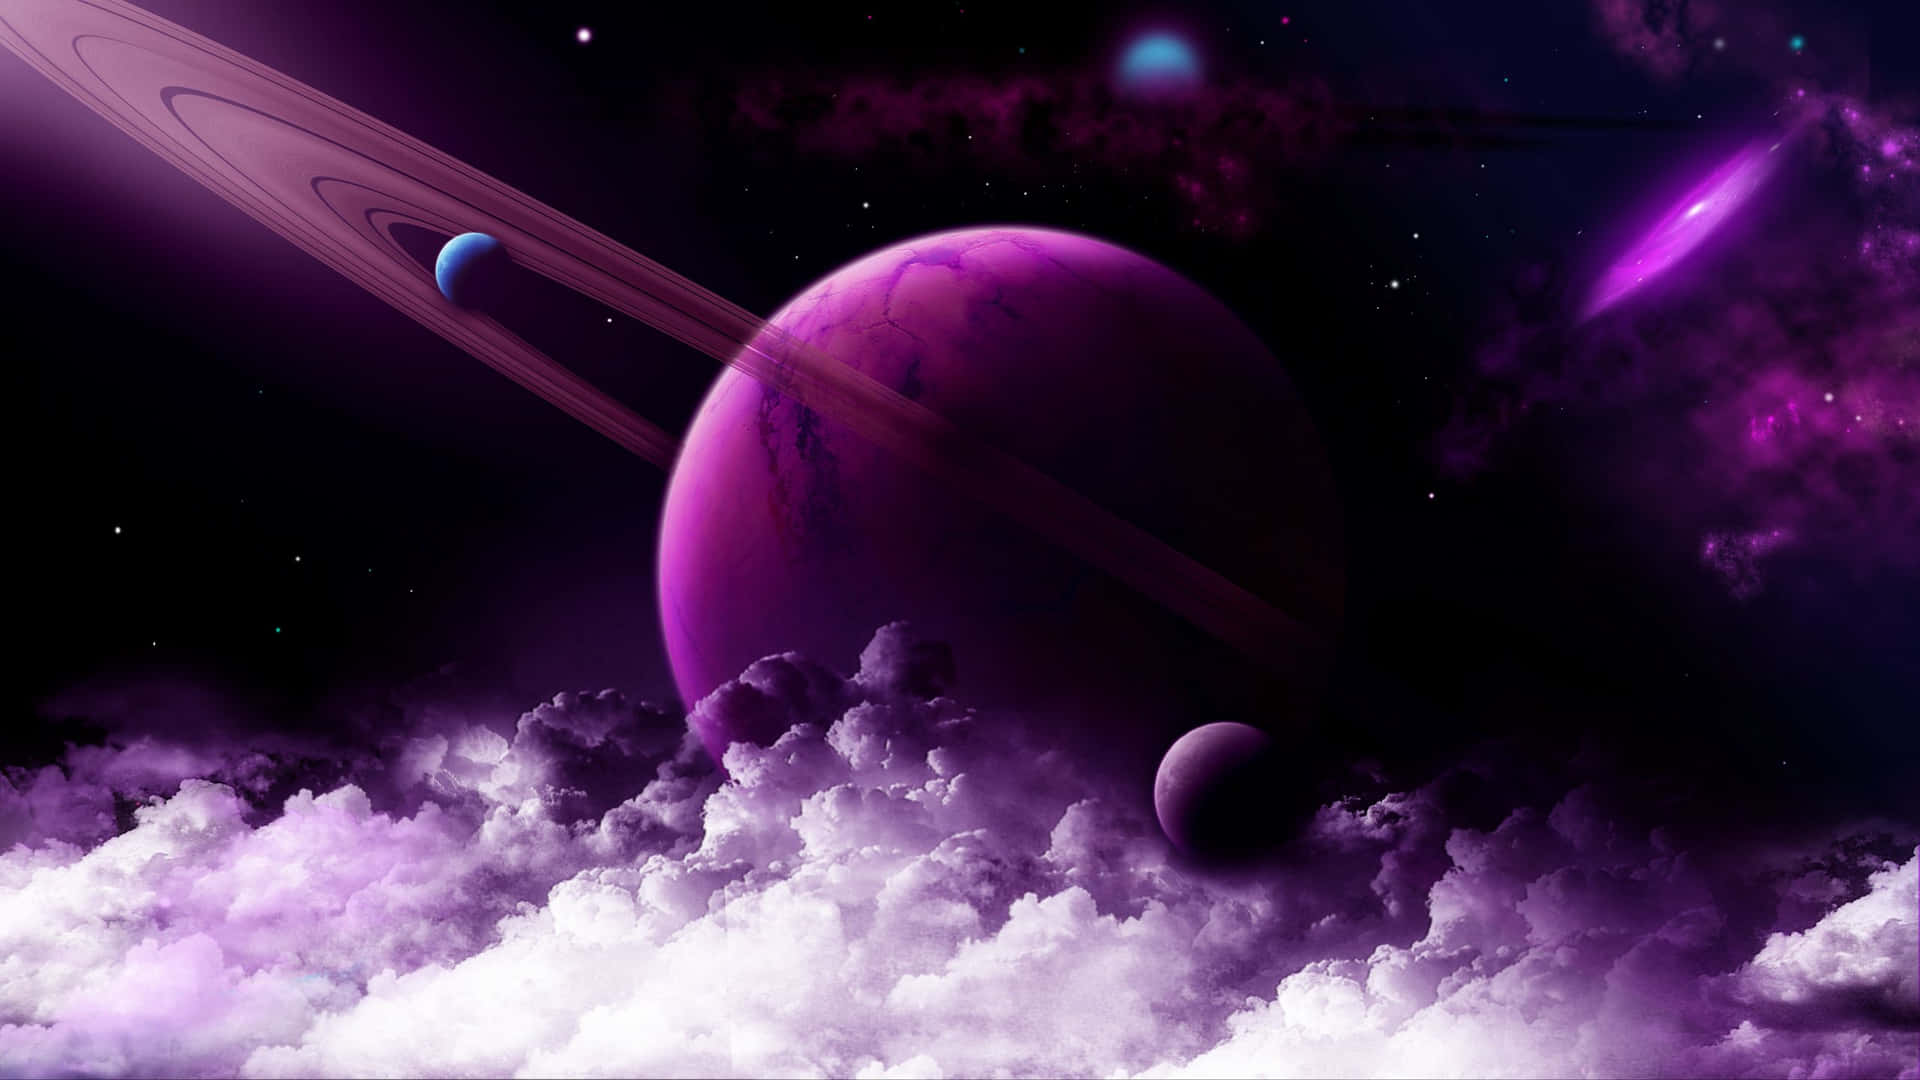 Mystic purple space art with illuminated stars and deep space feeling.